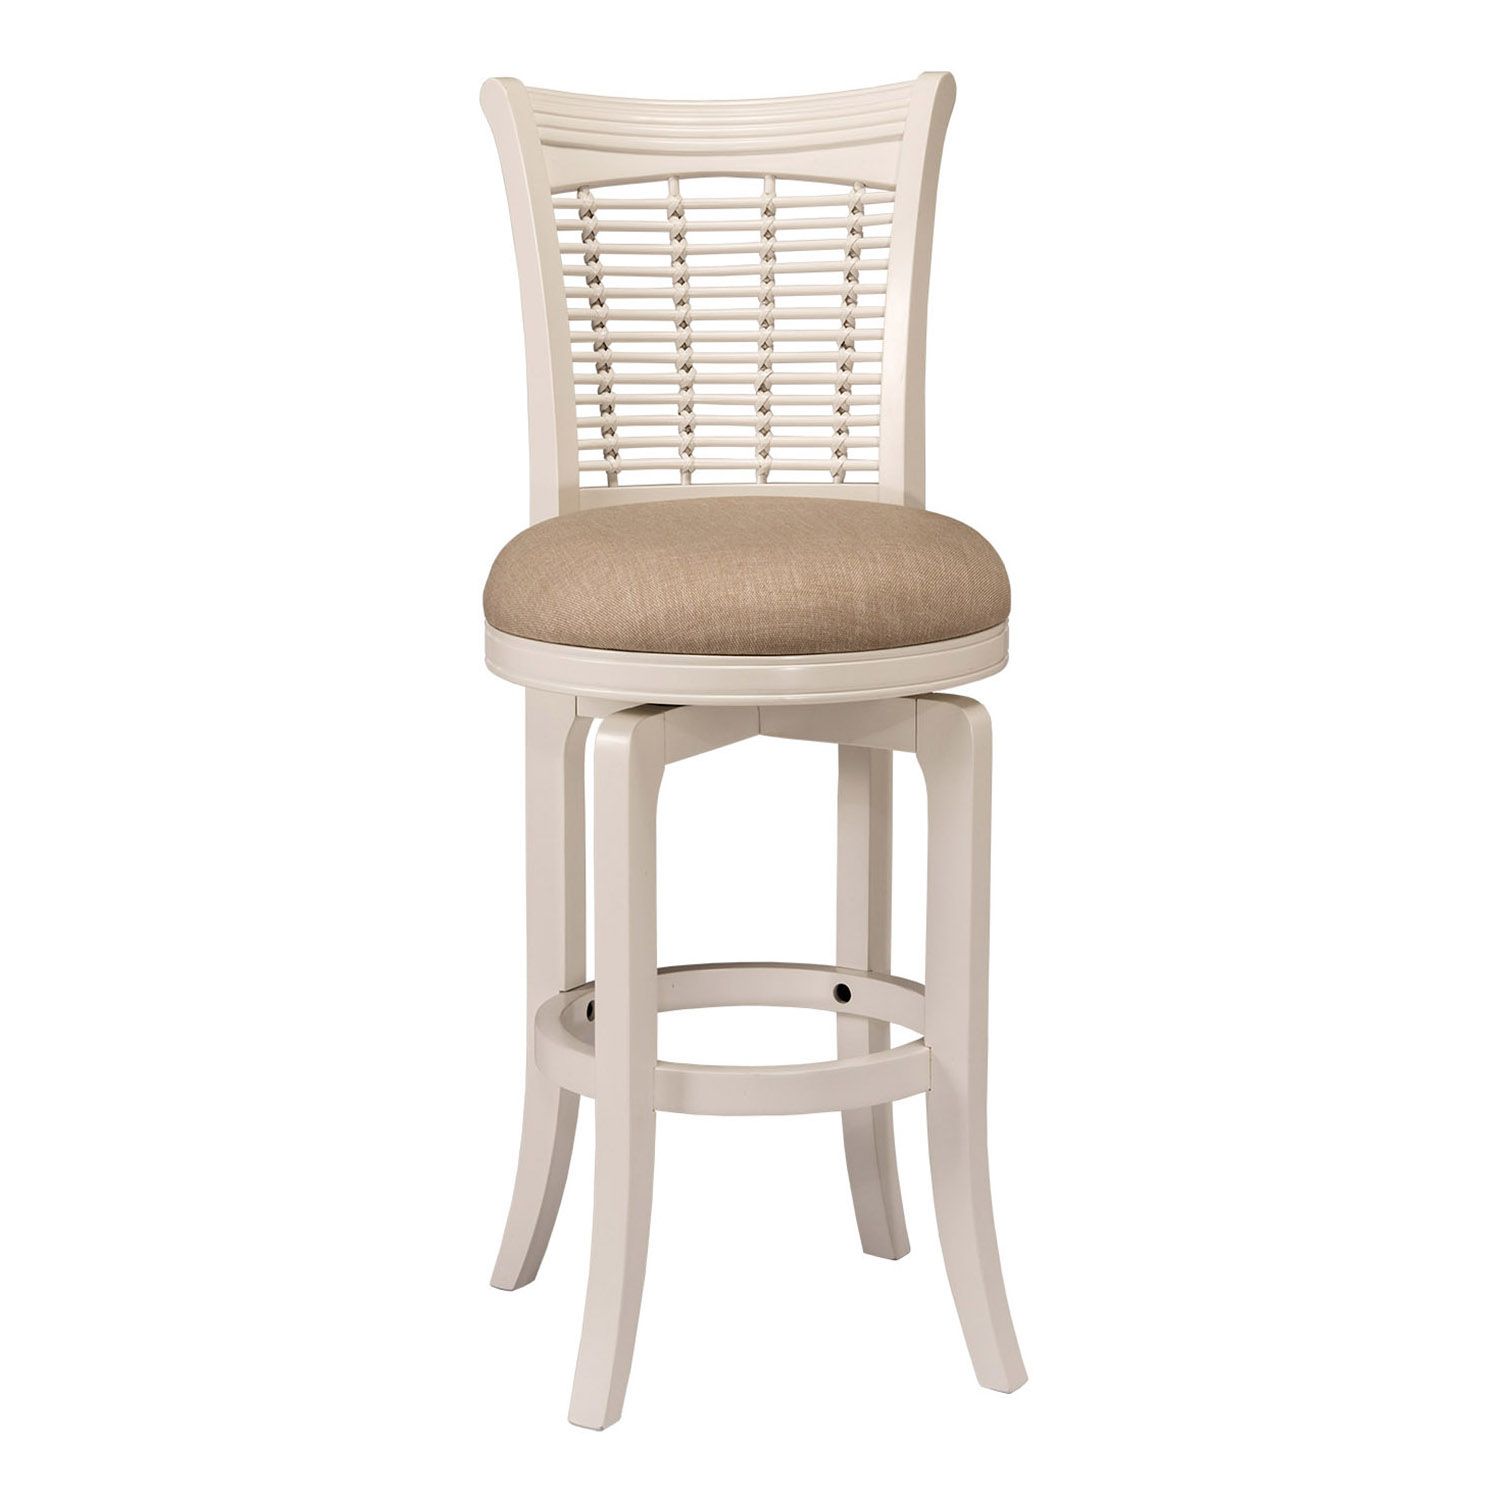 Image for Hillsdale Furniture Bayberry Swivel Bar Stool at Kohl's.